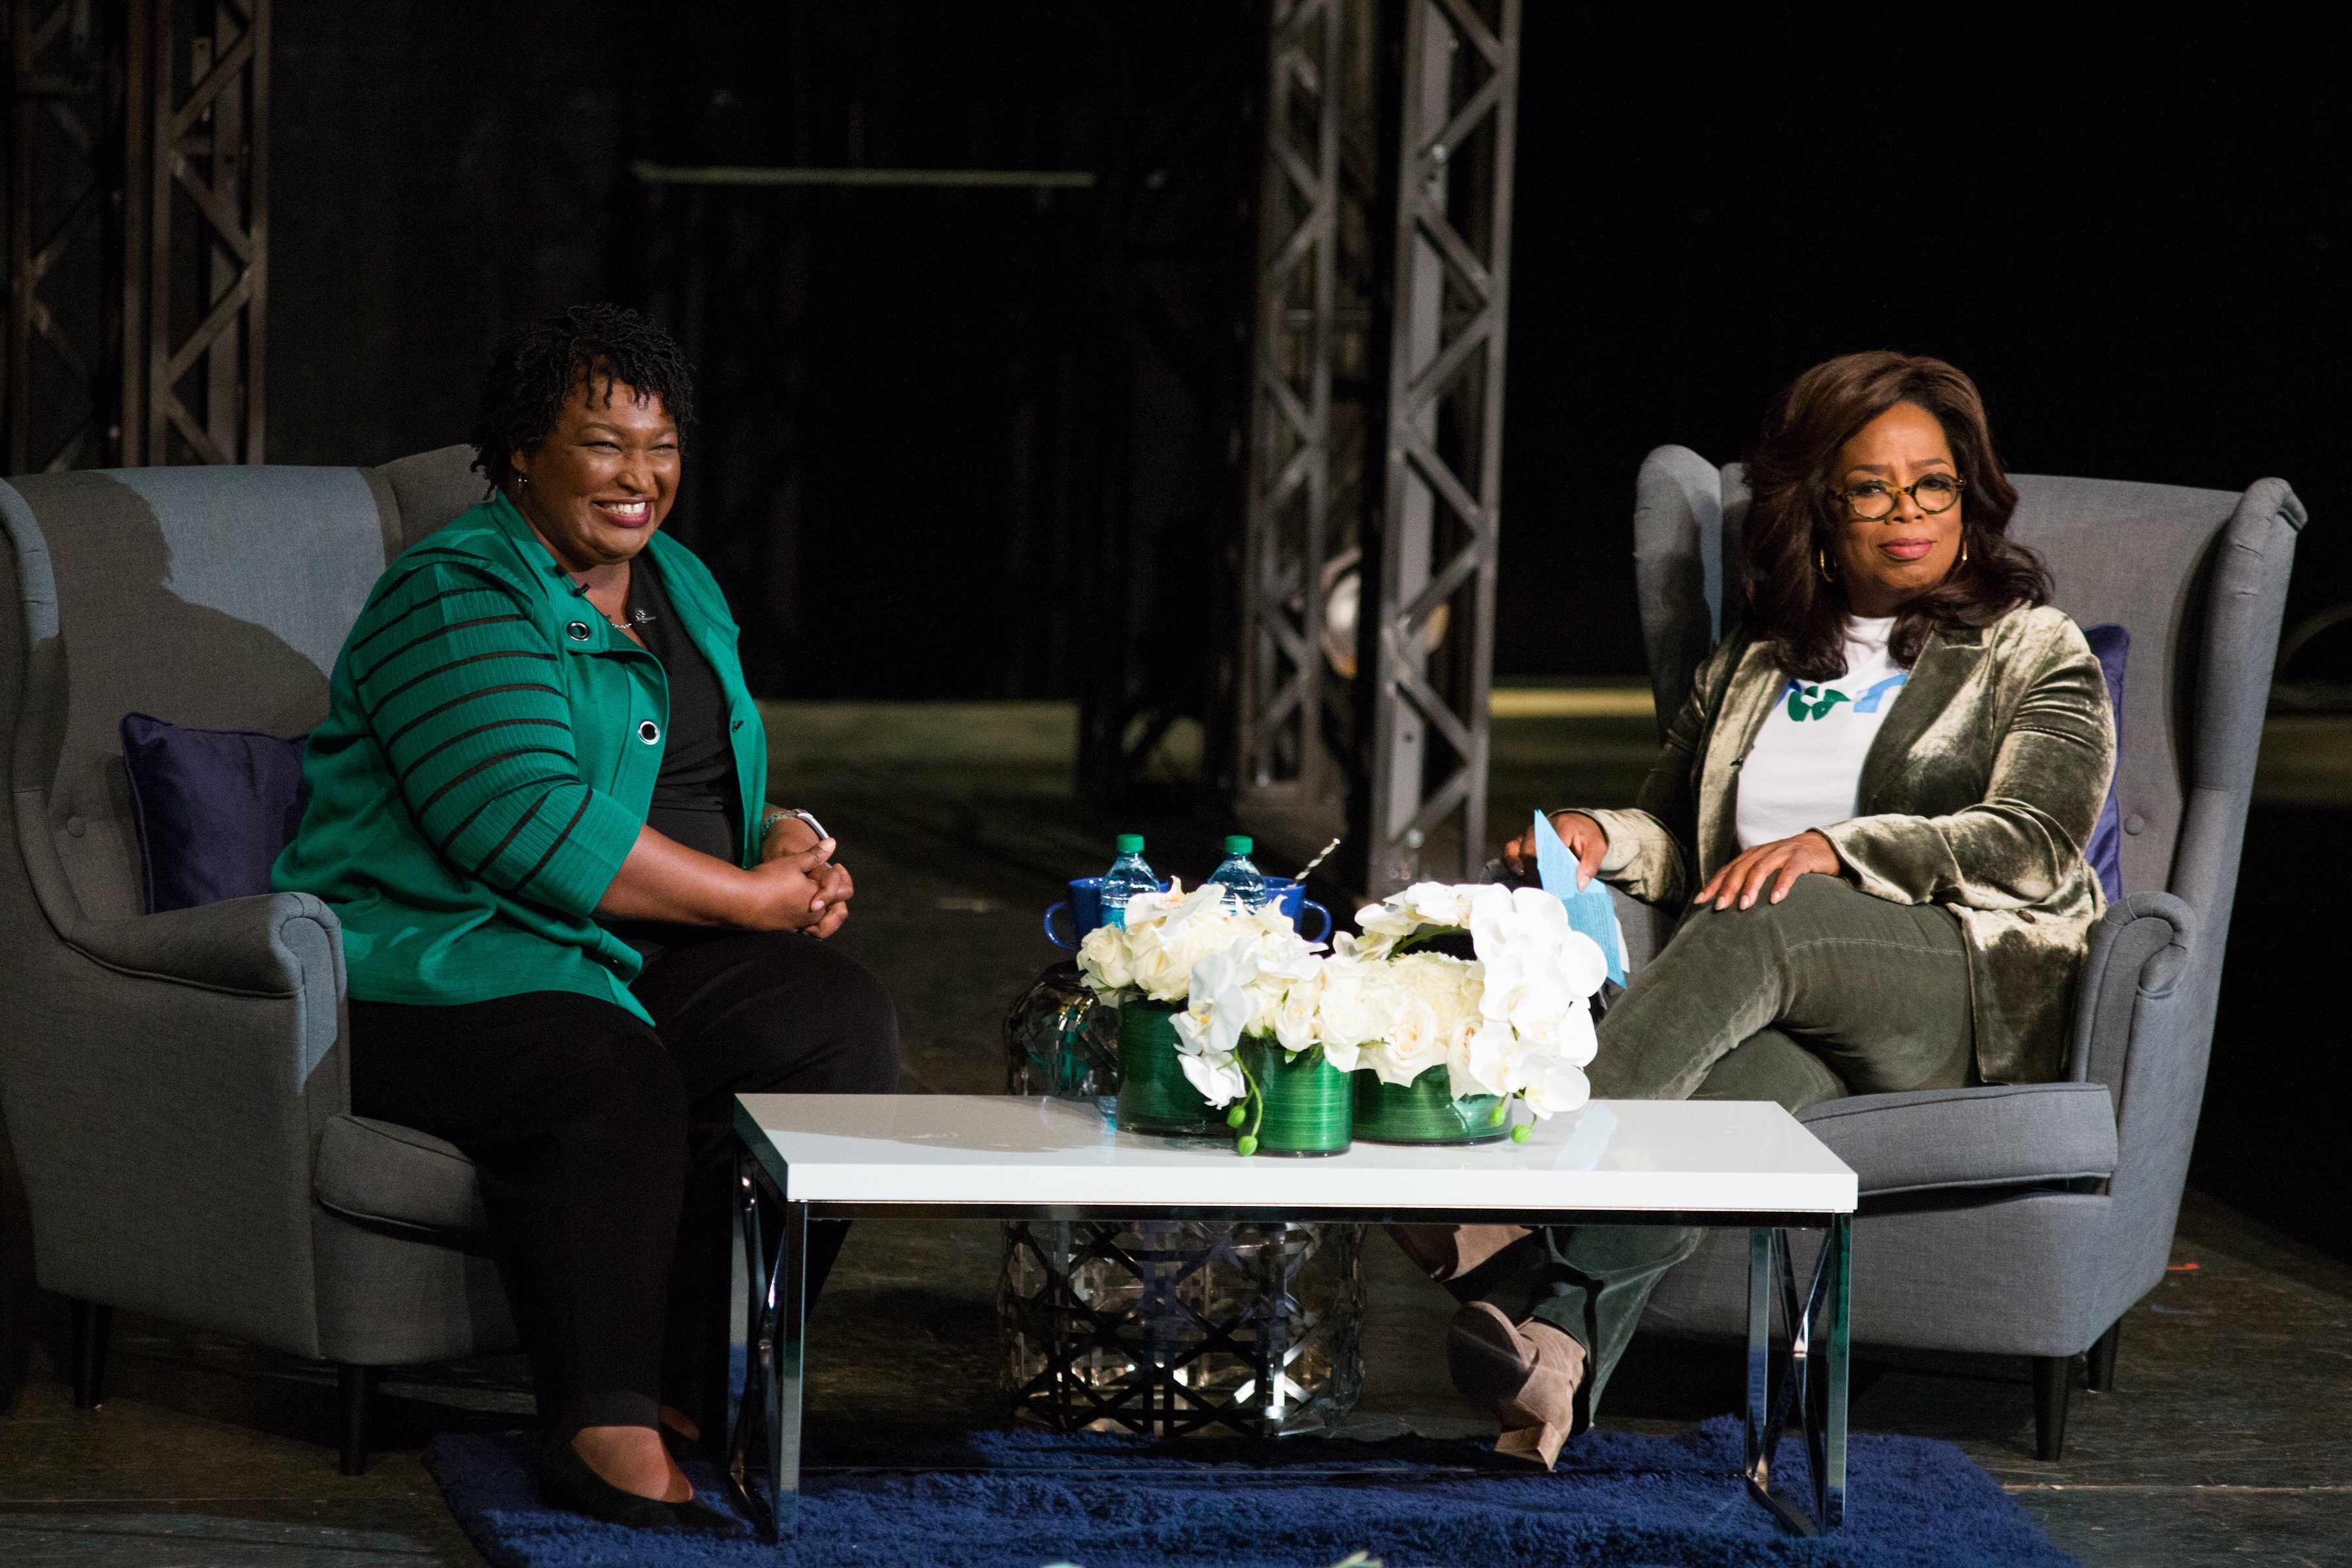 Oprah Winfrey interviews Stacey Abrams during a town hall style event at the Cobb Civic Center. (Jessica McGowan/Getty Images)